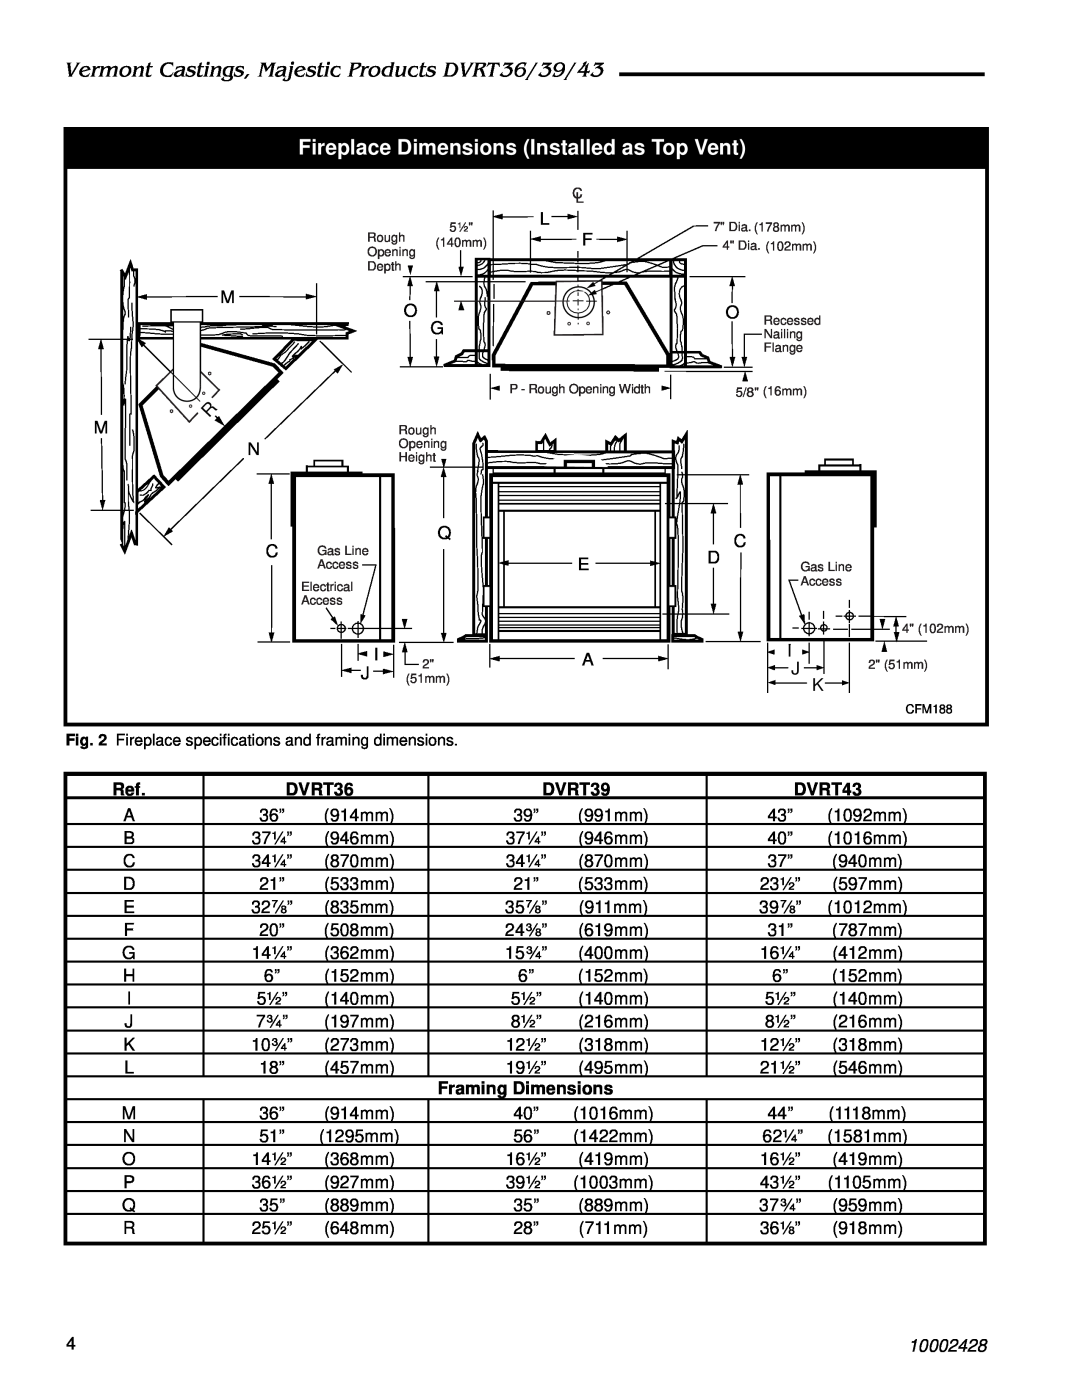 Vermont Casting Fireplace Dimensions Installed as Top Vent, Vermont Castings, Majestic Products DVRT36/39/43, DVRT39 